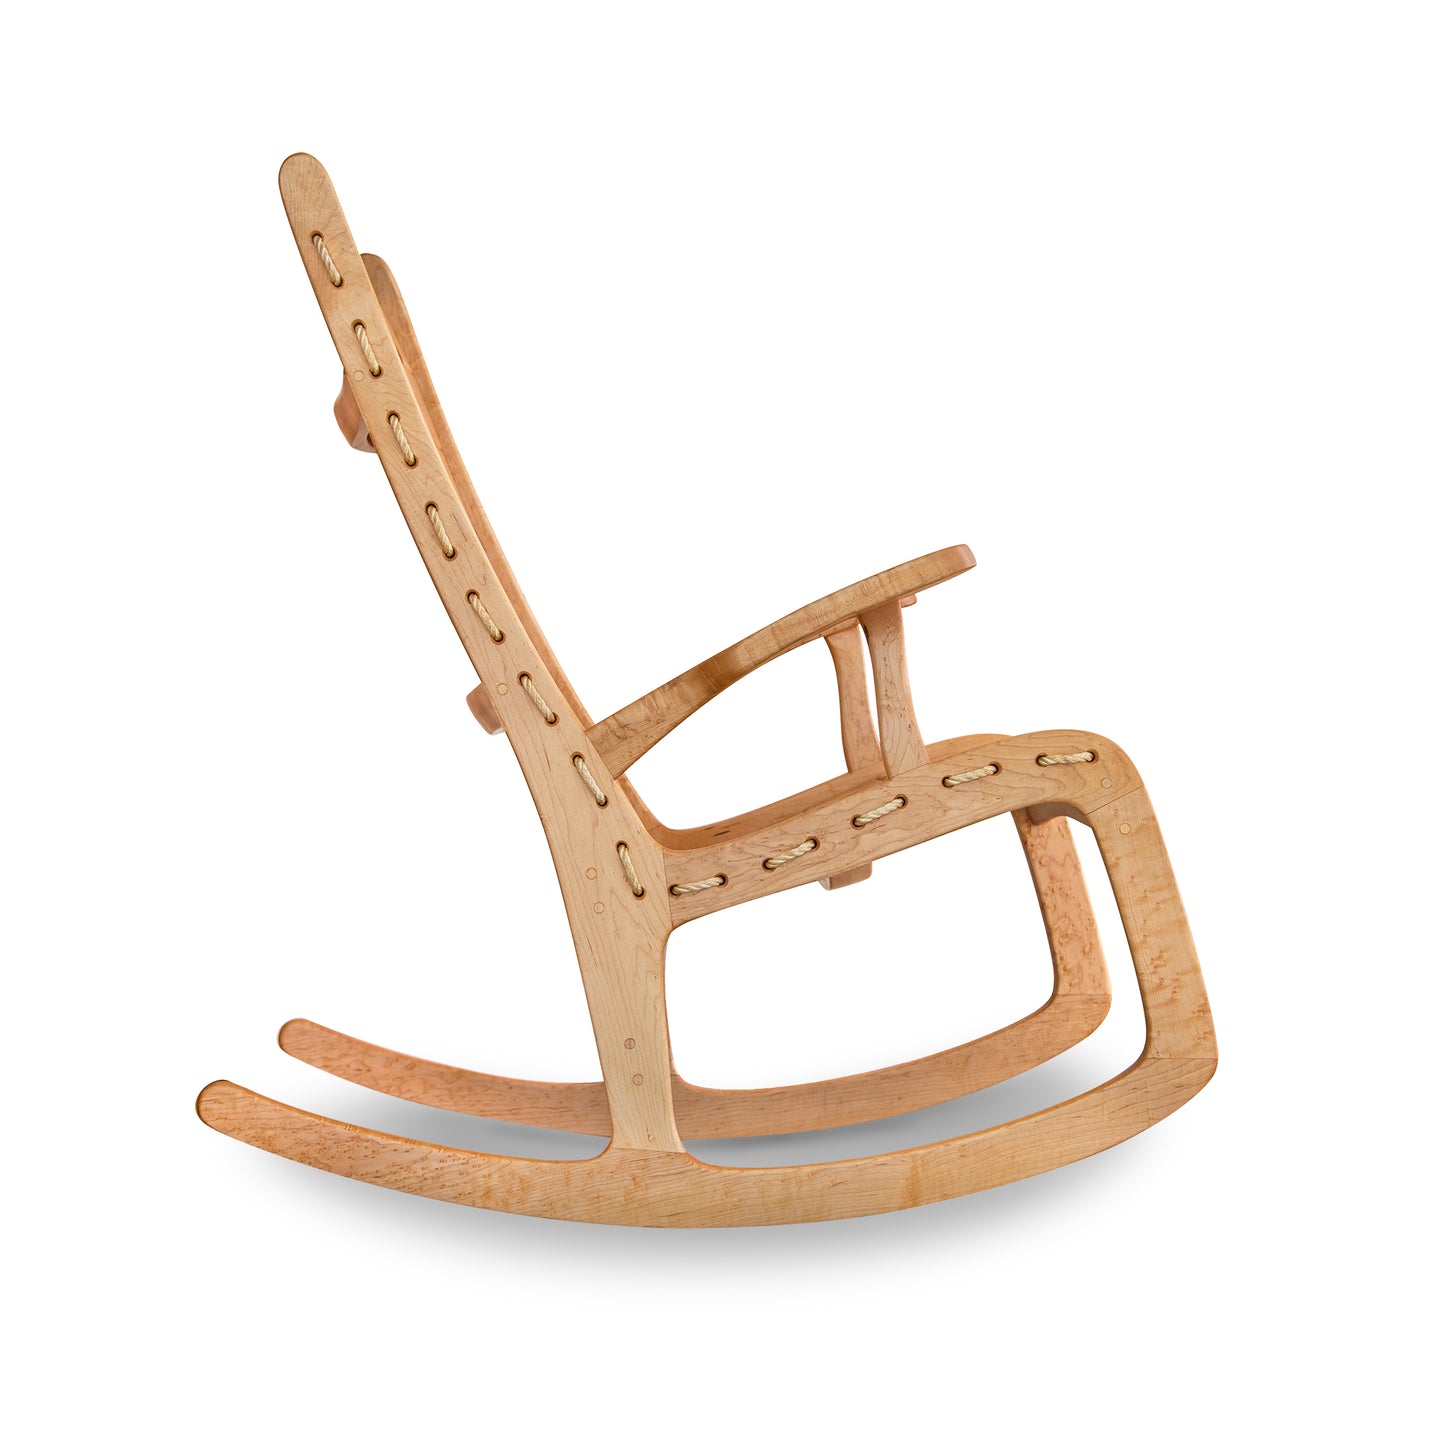 A Quilted Vermont Birdseye Maple Rocking Chair from Vermont Folk Rocker, with a modern design, crafted from birdseye maple, featuring interlocking pieces, viewed from a slight angle on a white background.